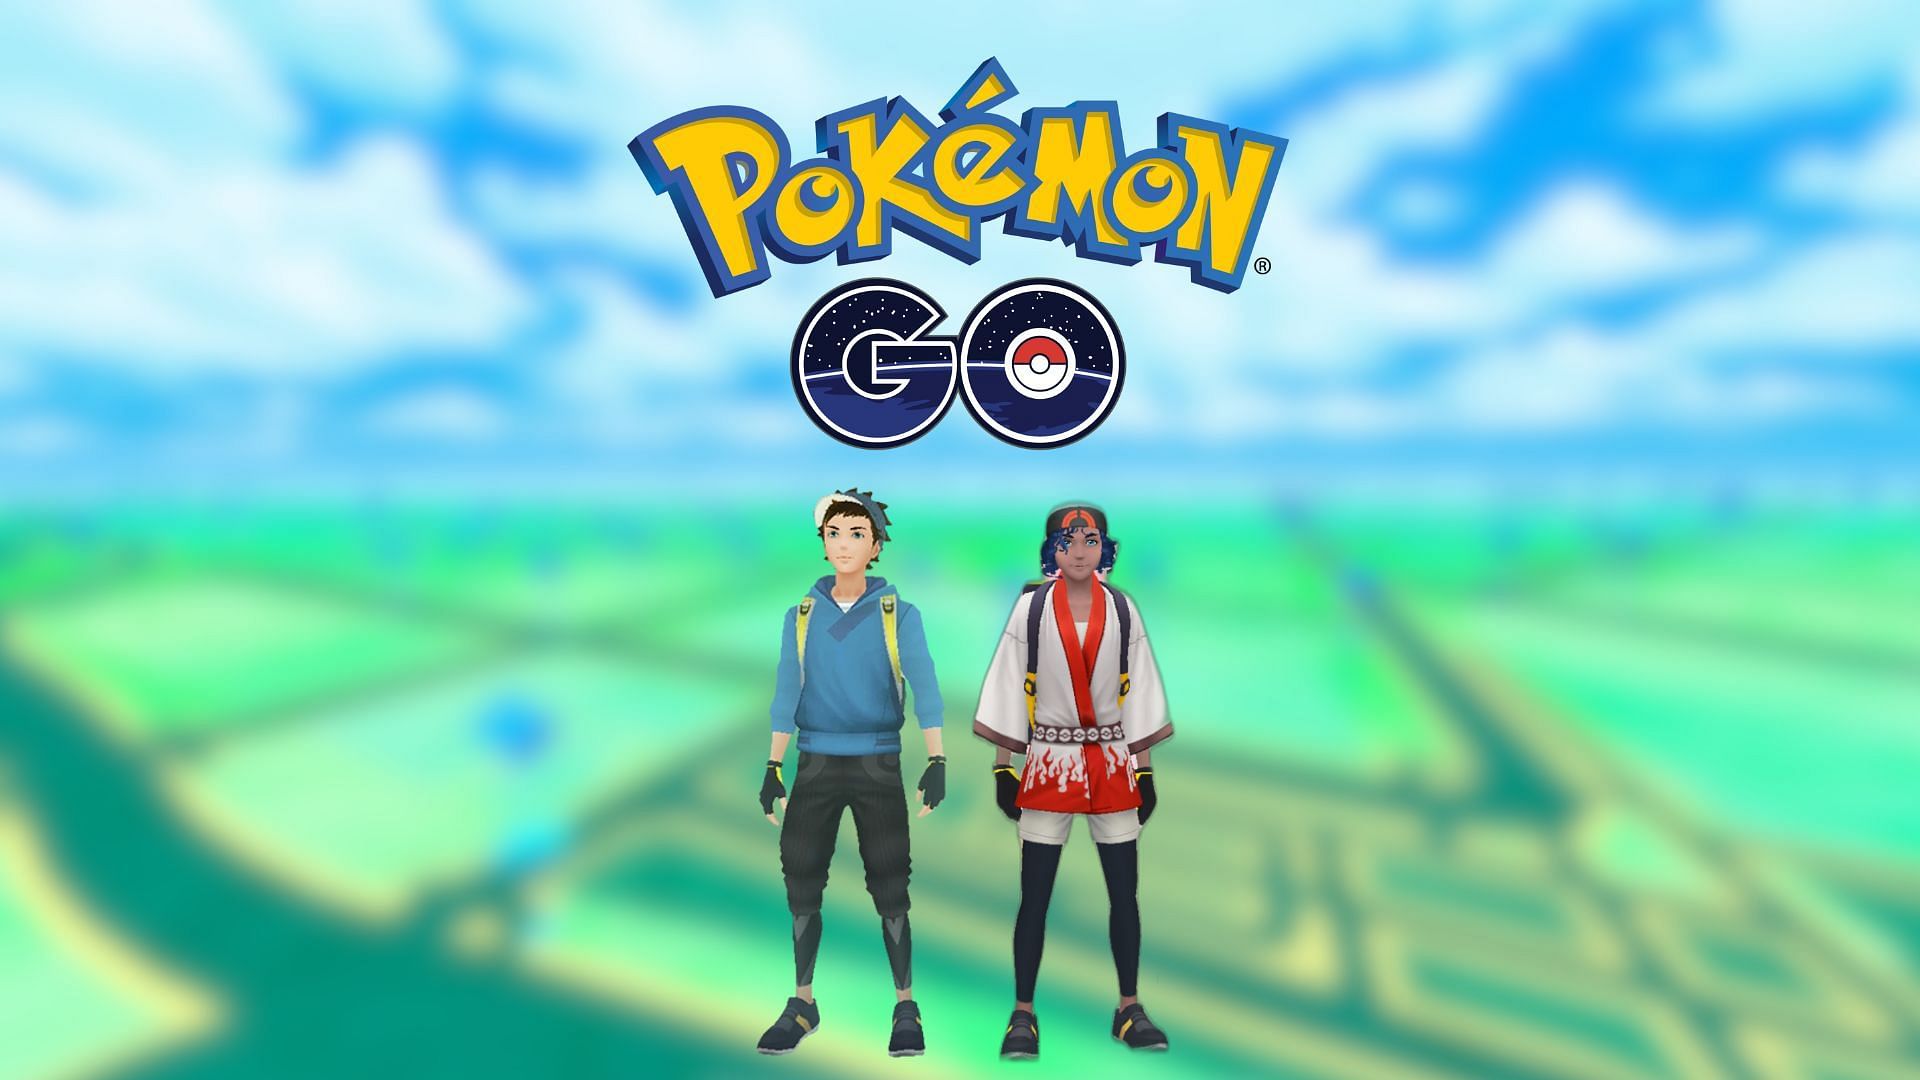 Side-by-side comparison of Pokemon GO avatars before and after the update (Image via The Pokemon Company)